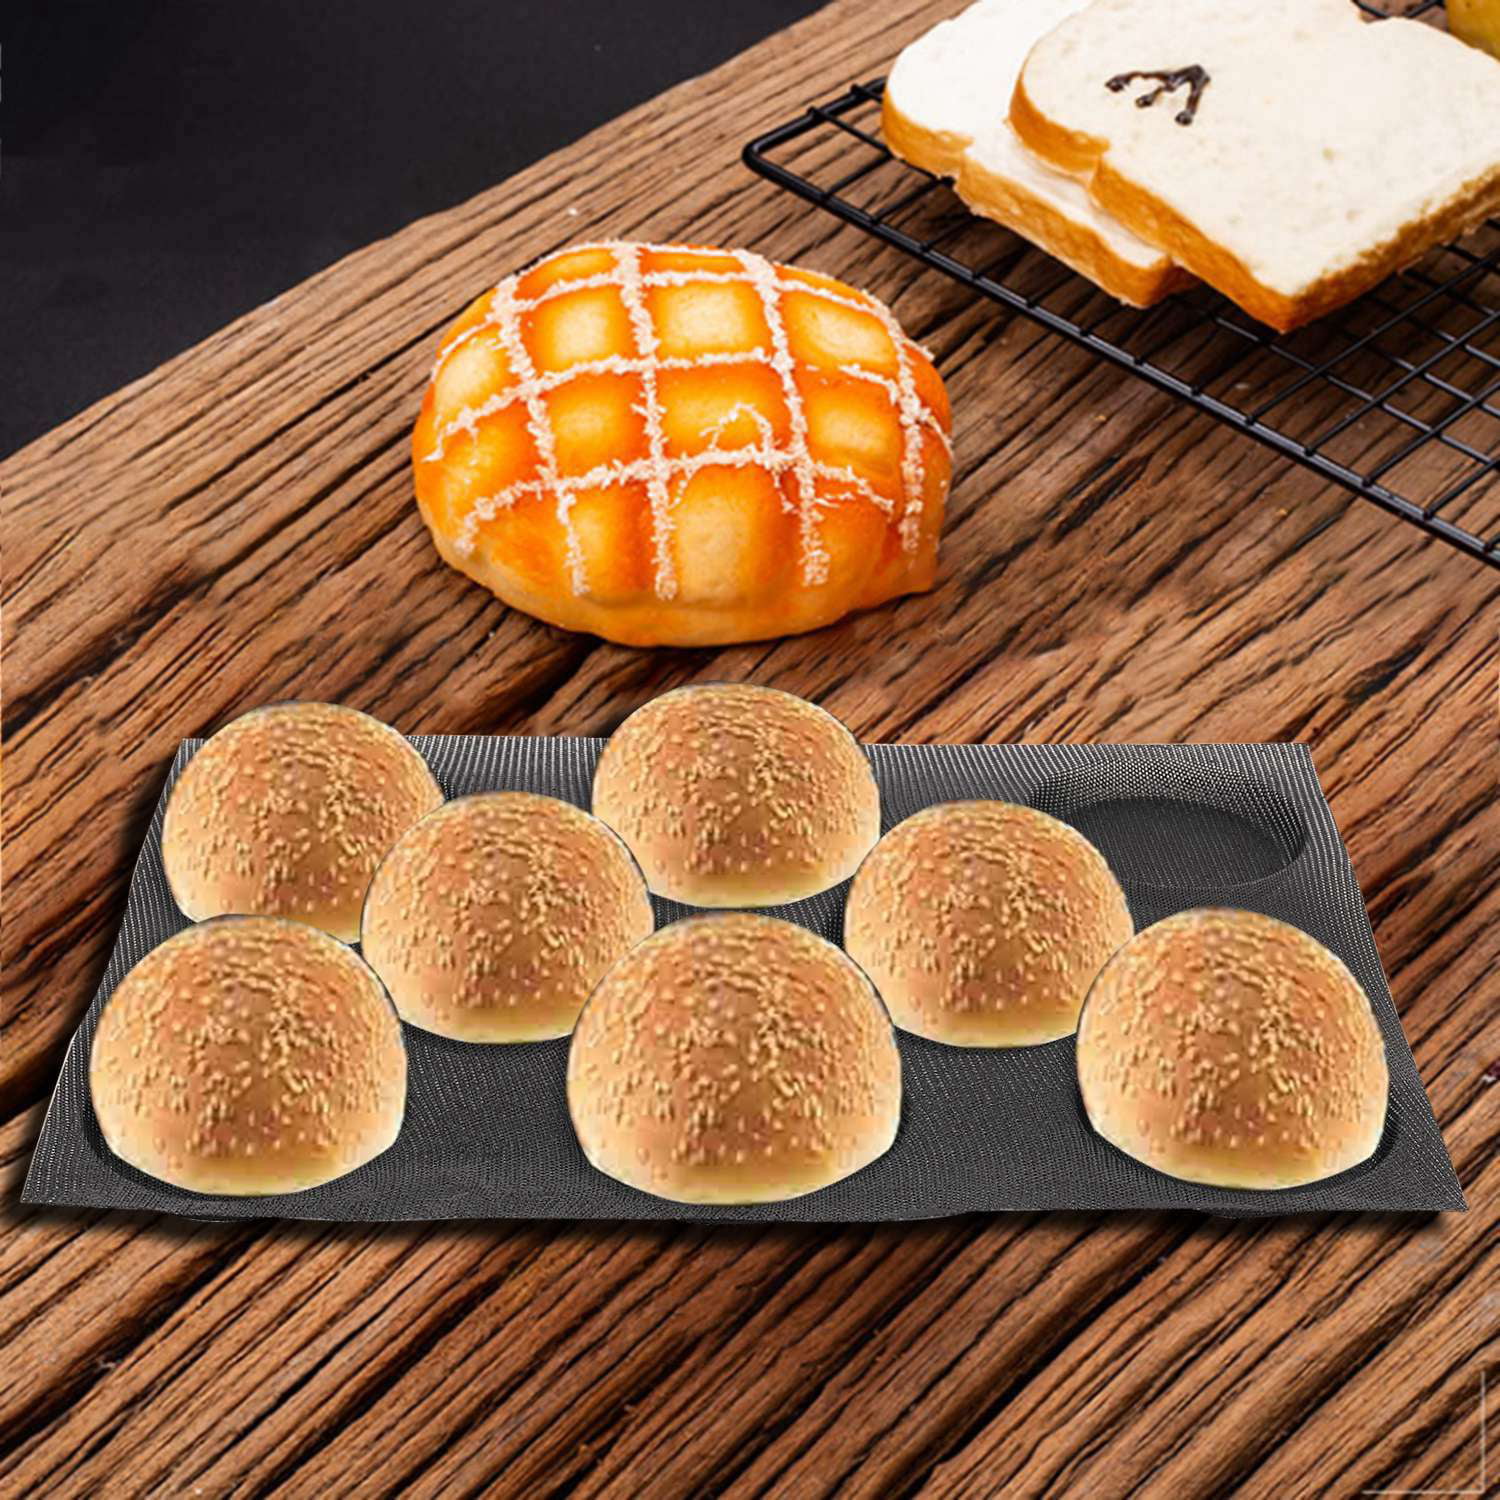 Silicone Bread Forms Perforated Bakery Molds Non Stick Baking Sheets 